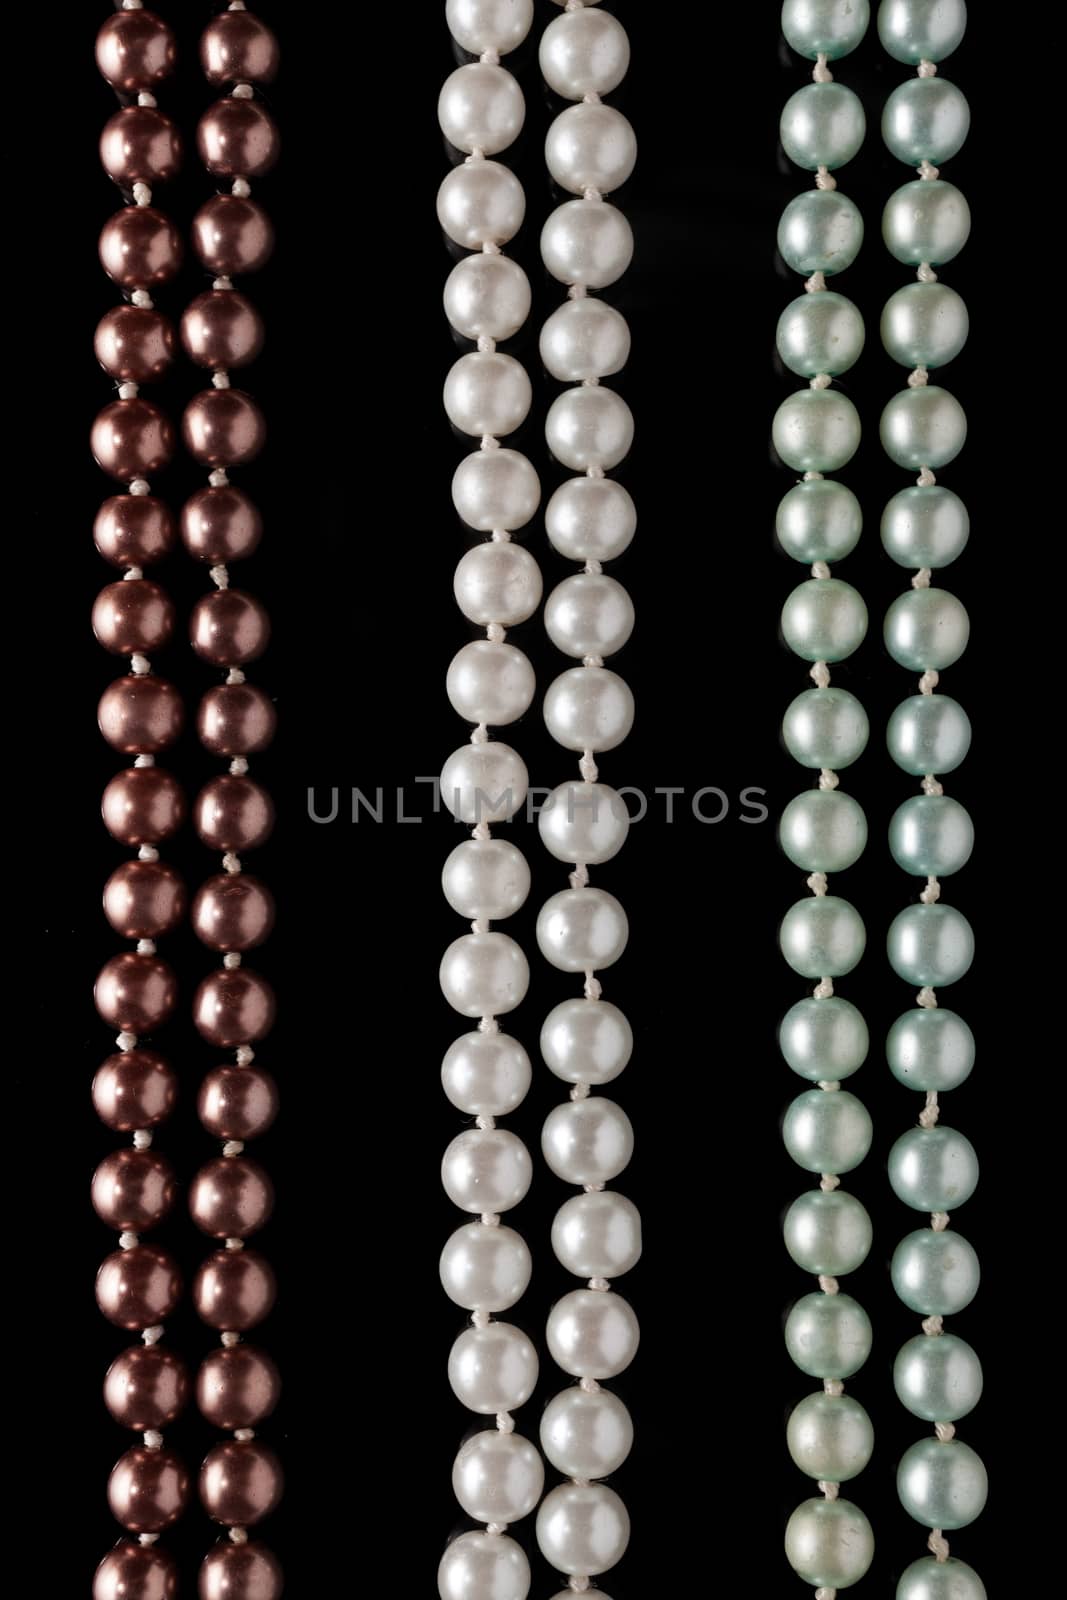 Pearls by Portokalis